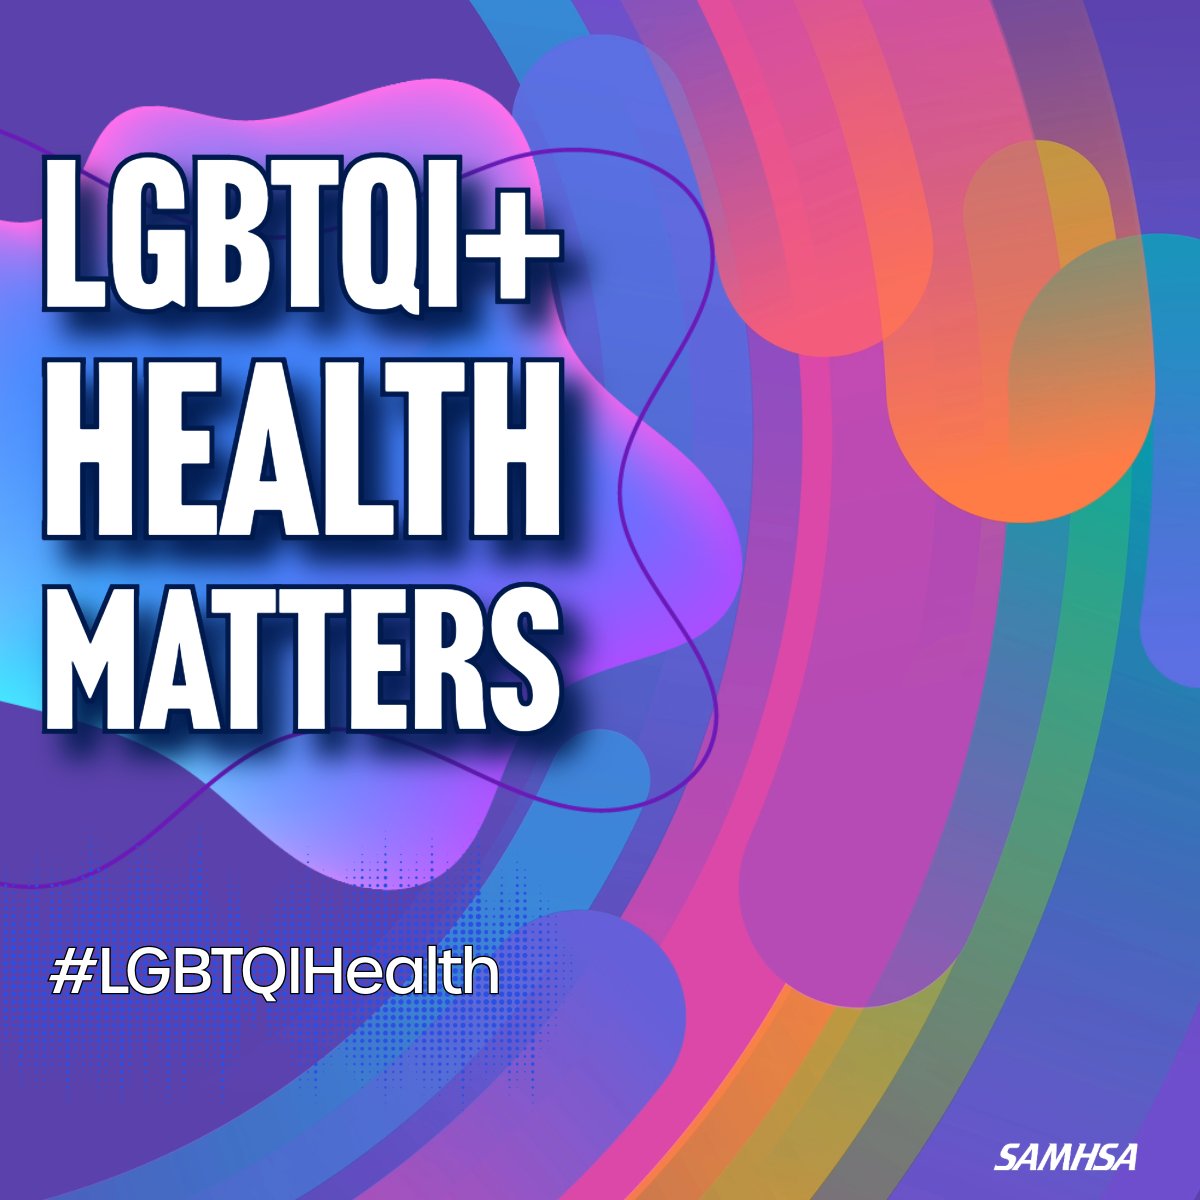 We celebrate and remain committed to support the health and well-being of #LGBTQI+ communities. Find helpful resources and learn about SAMHSA's Center of Excellence on LGBTQI+ Behavioral Health Equity: lgbtqequity.org #LGBTQIHealthAwarenessWeek #LGBTQIHealth